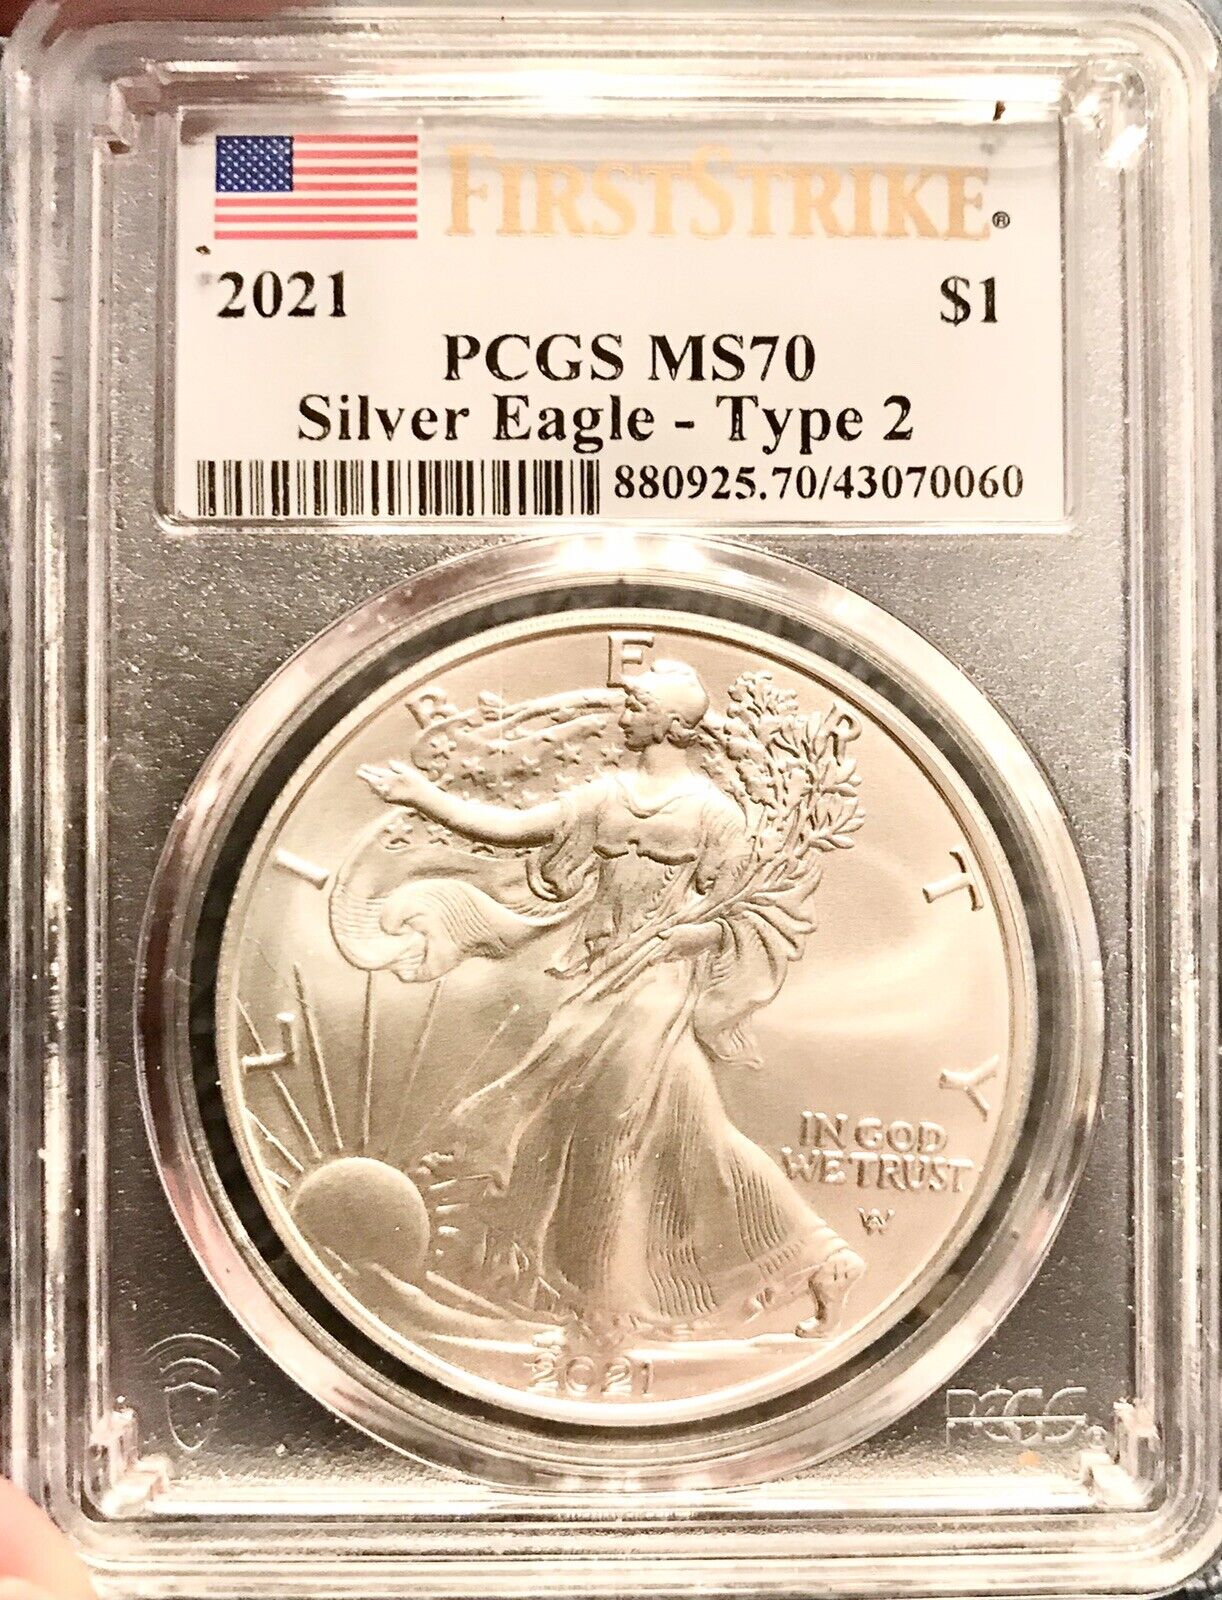 Flawless First Strike 2021 Us Silver Eagle Type 2 Pcgs Ms 70 Flag Label 1 Ty Oz!